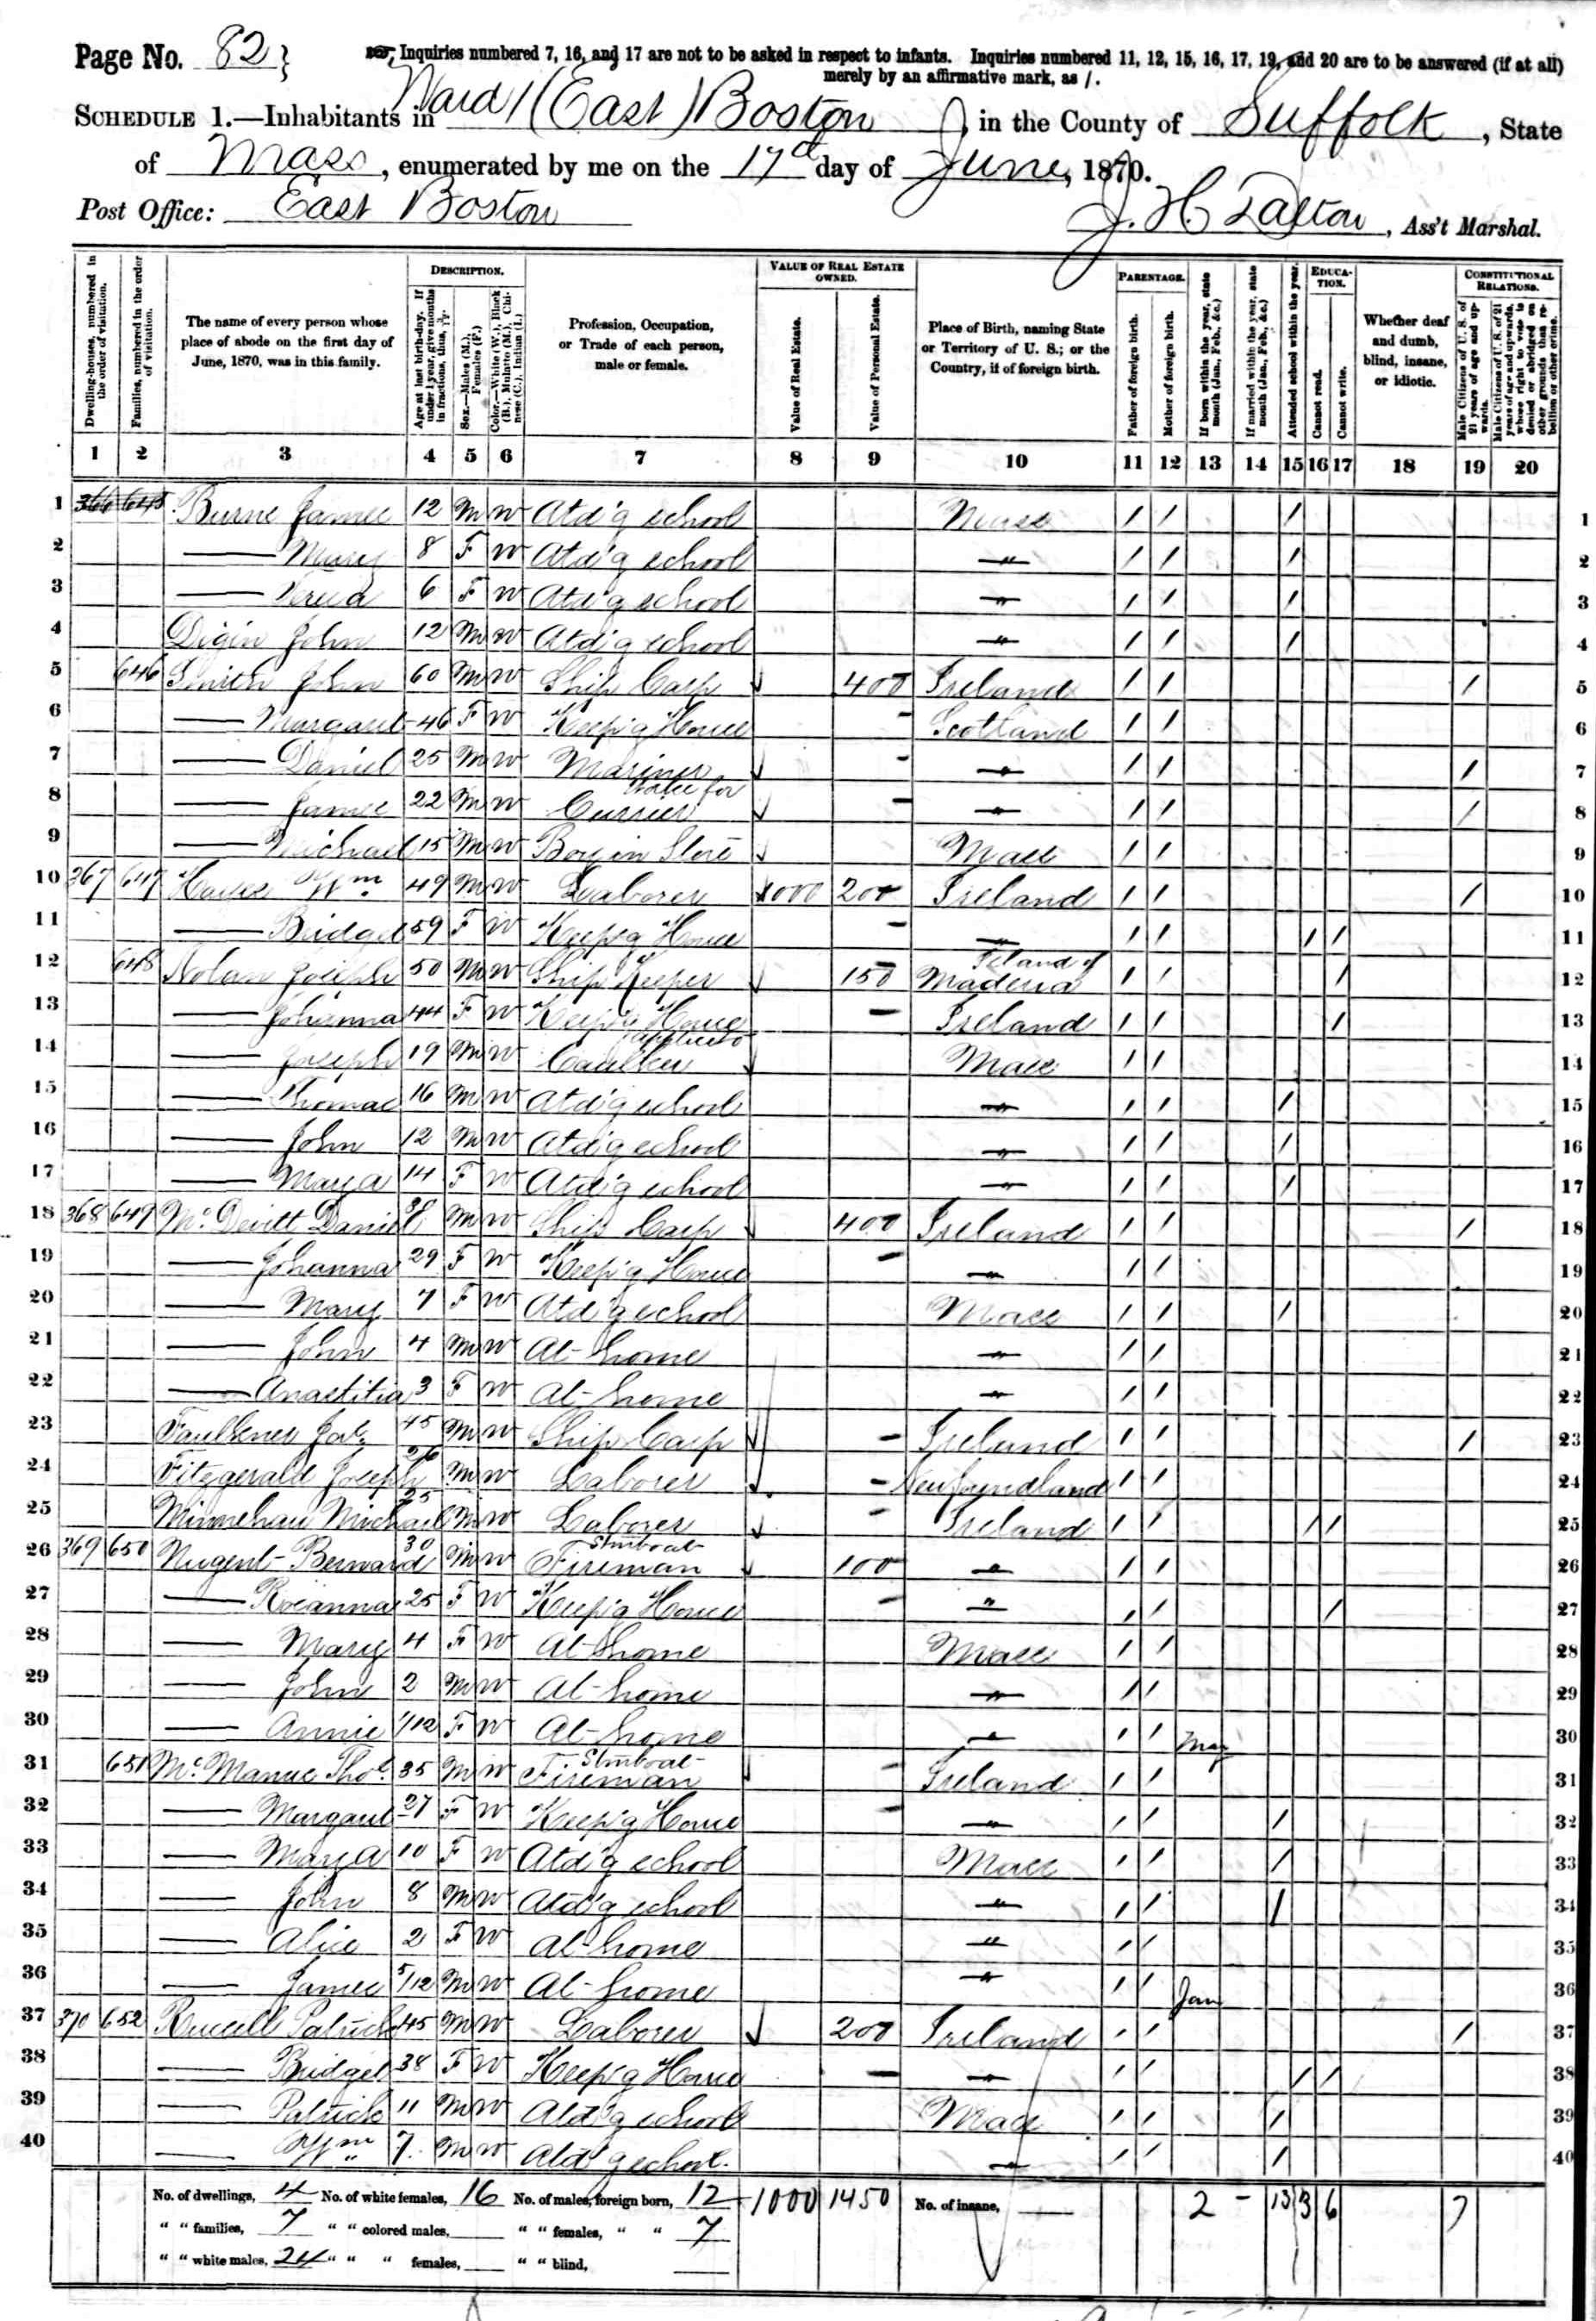 Image of an 1870 census page